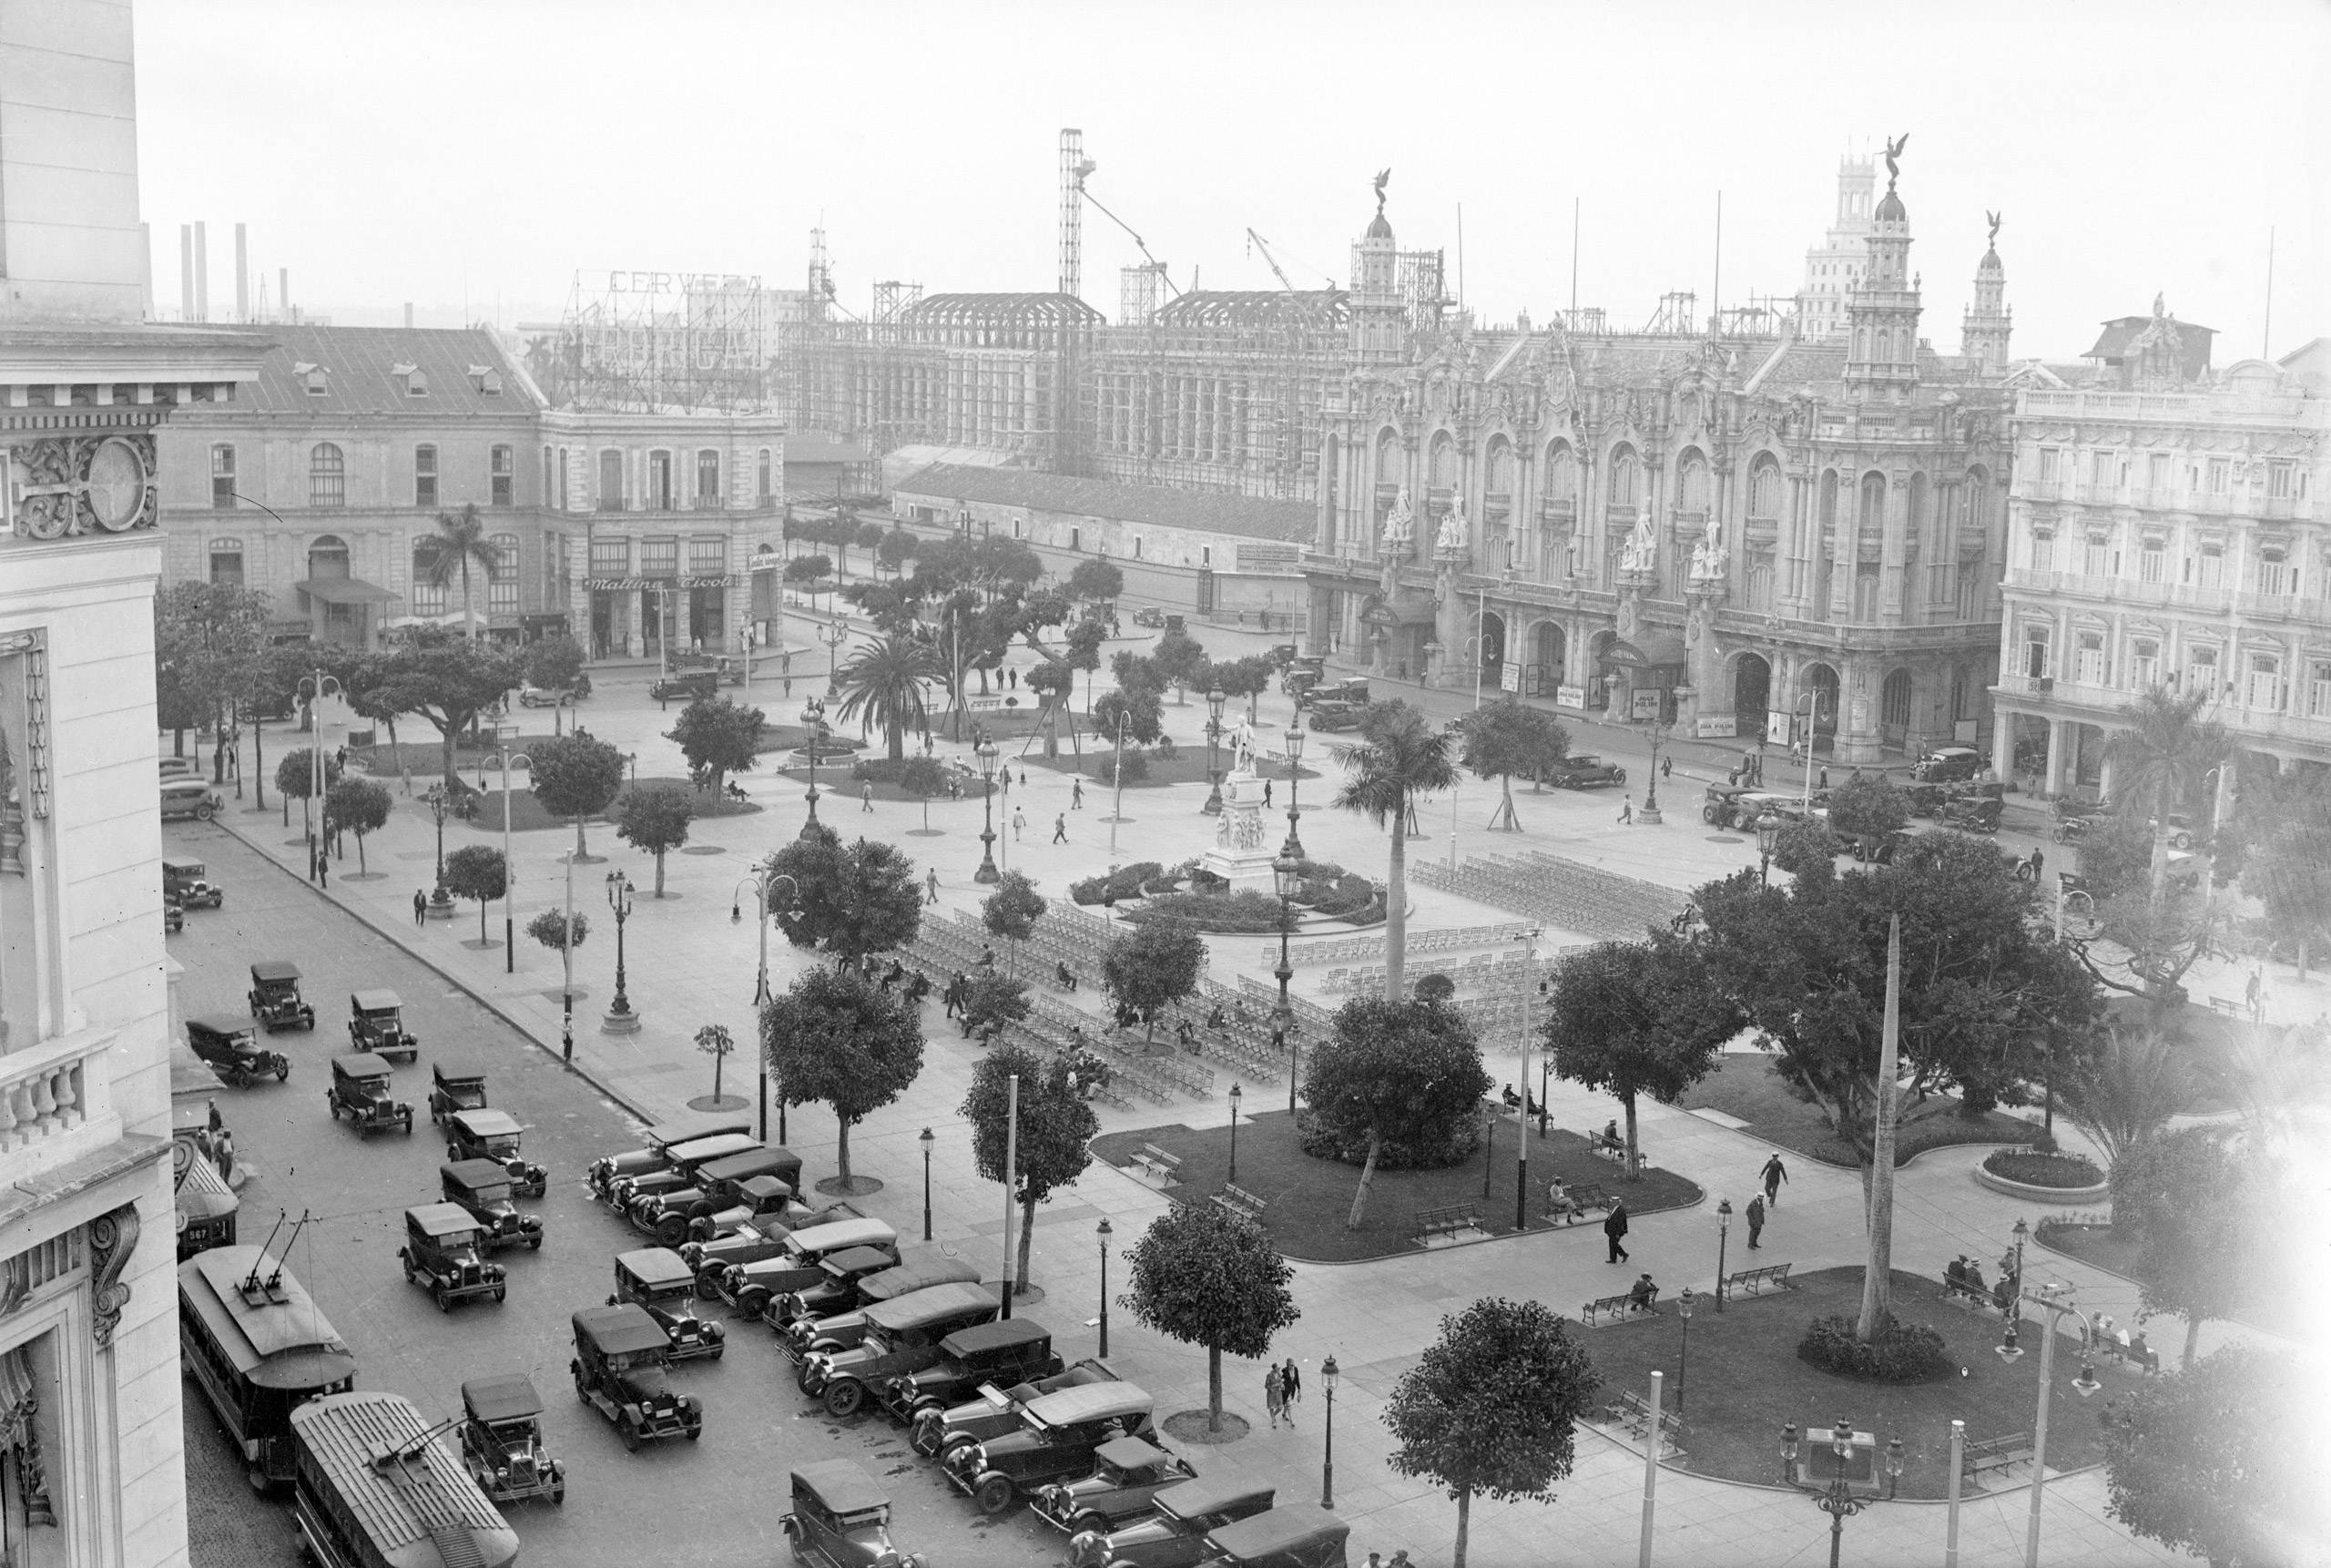 A view of Central Park in Havana, Cuba. 1928.